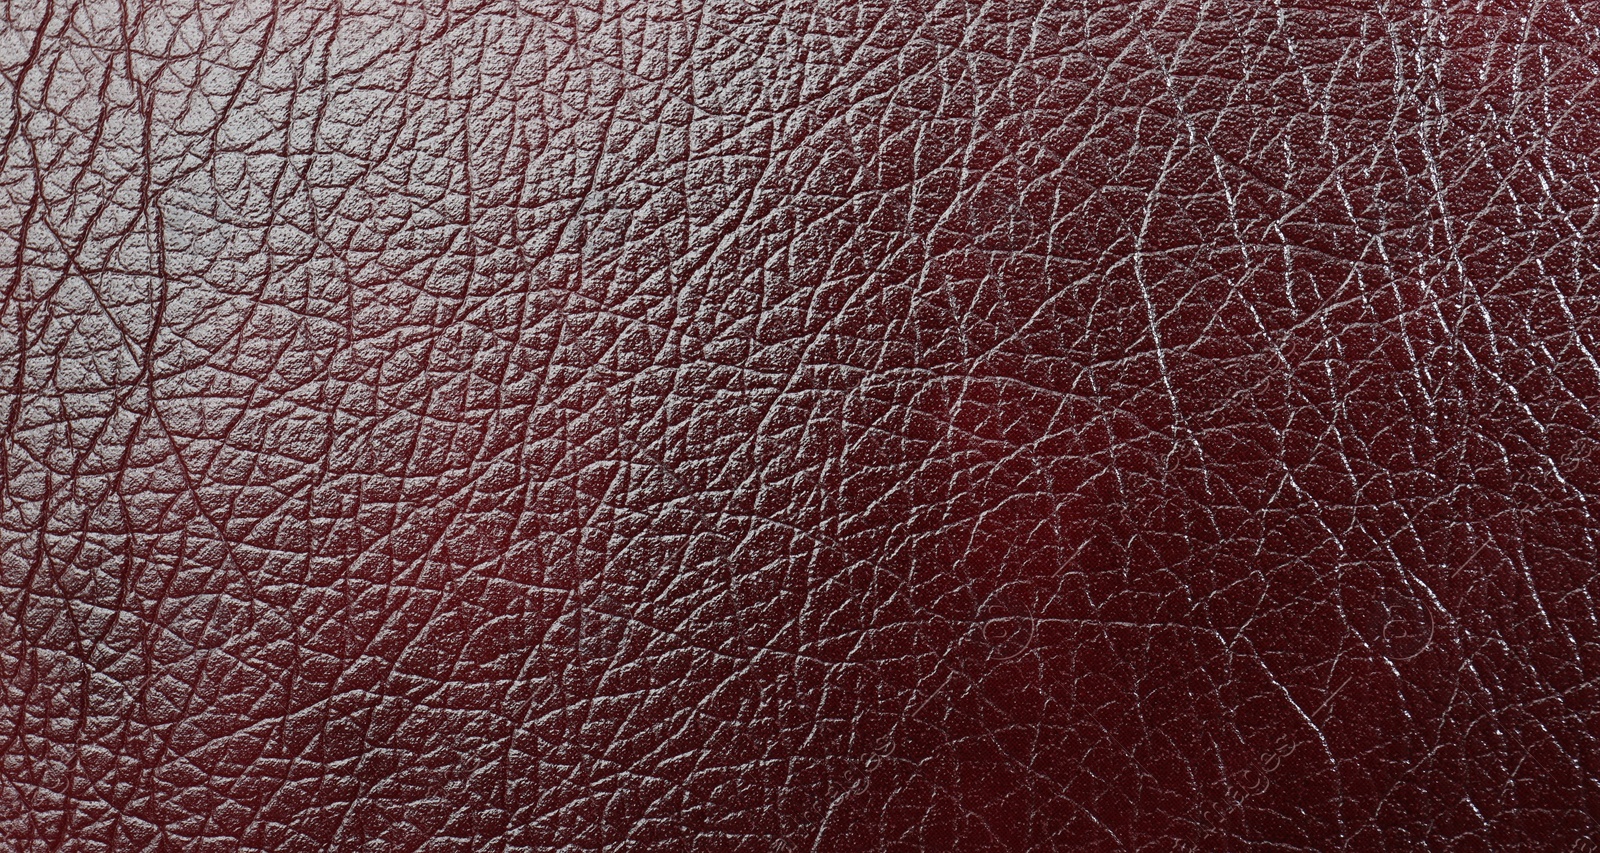 Photo of Texture of natural leather as background, top view